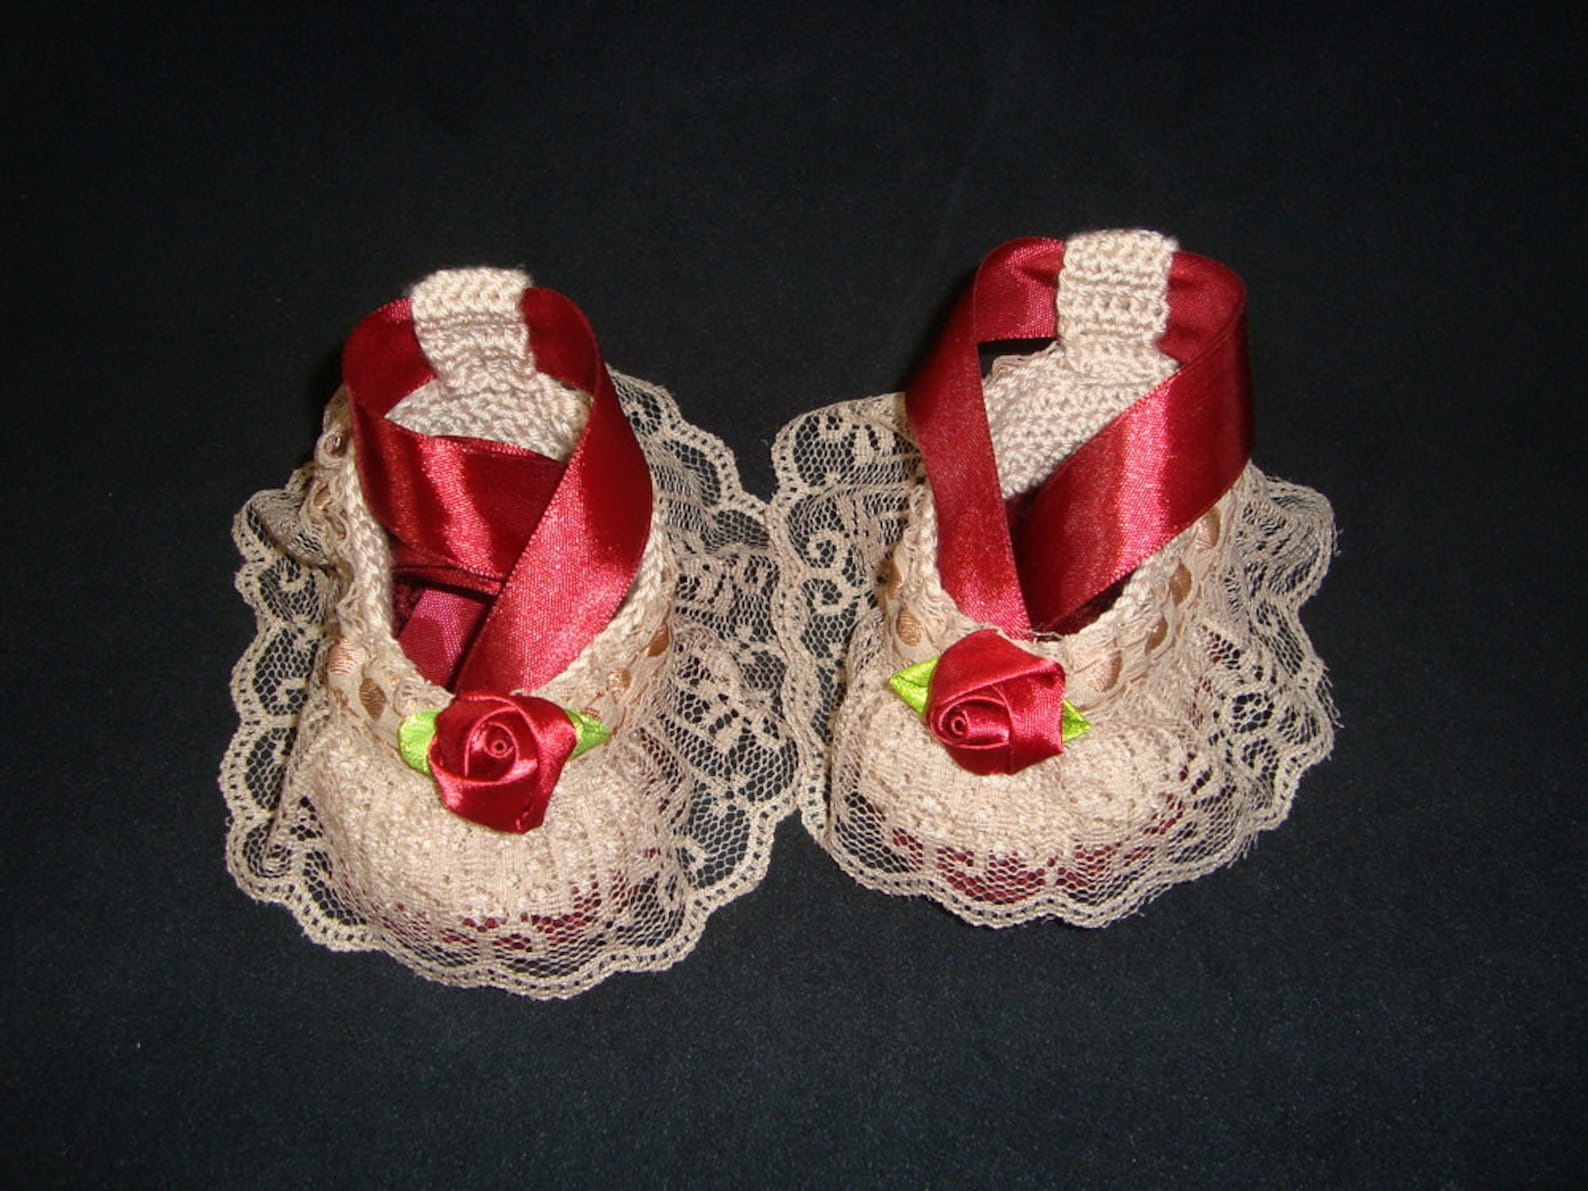 newborn baby girl handmade crochet beige - burgundy shoes, baby girl booties, girl slippers, ballet shoes, slippers with ribbons